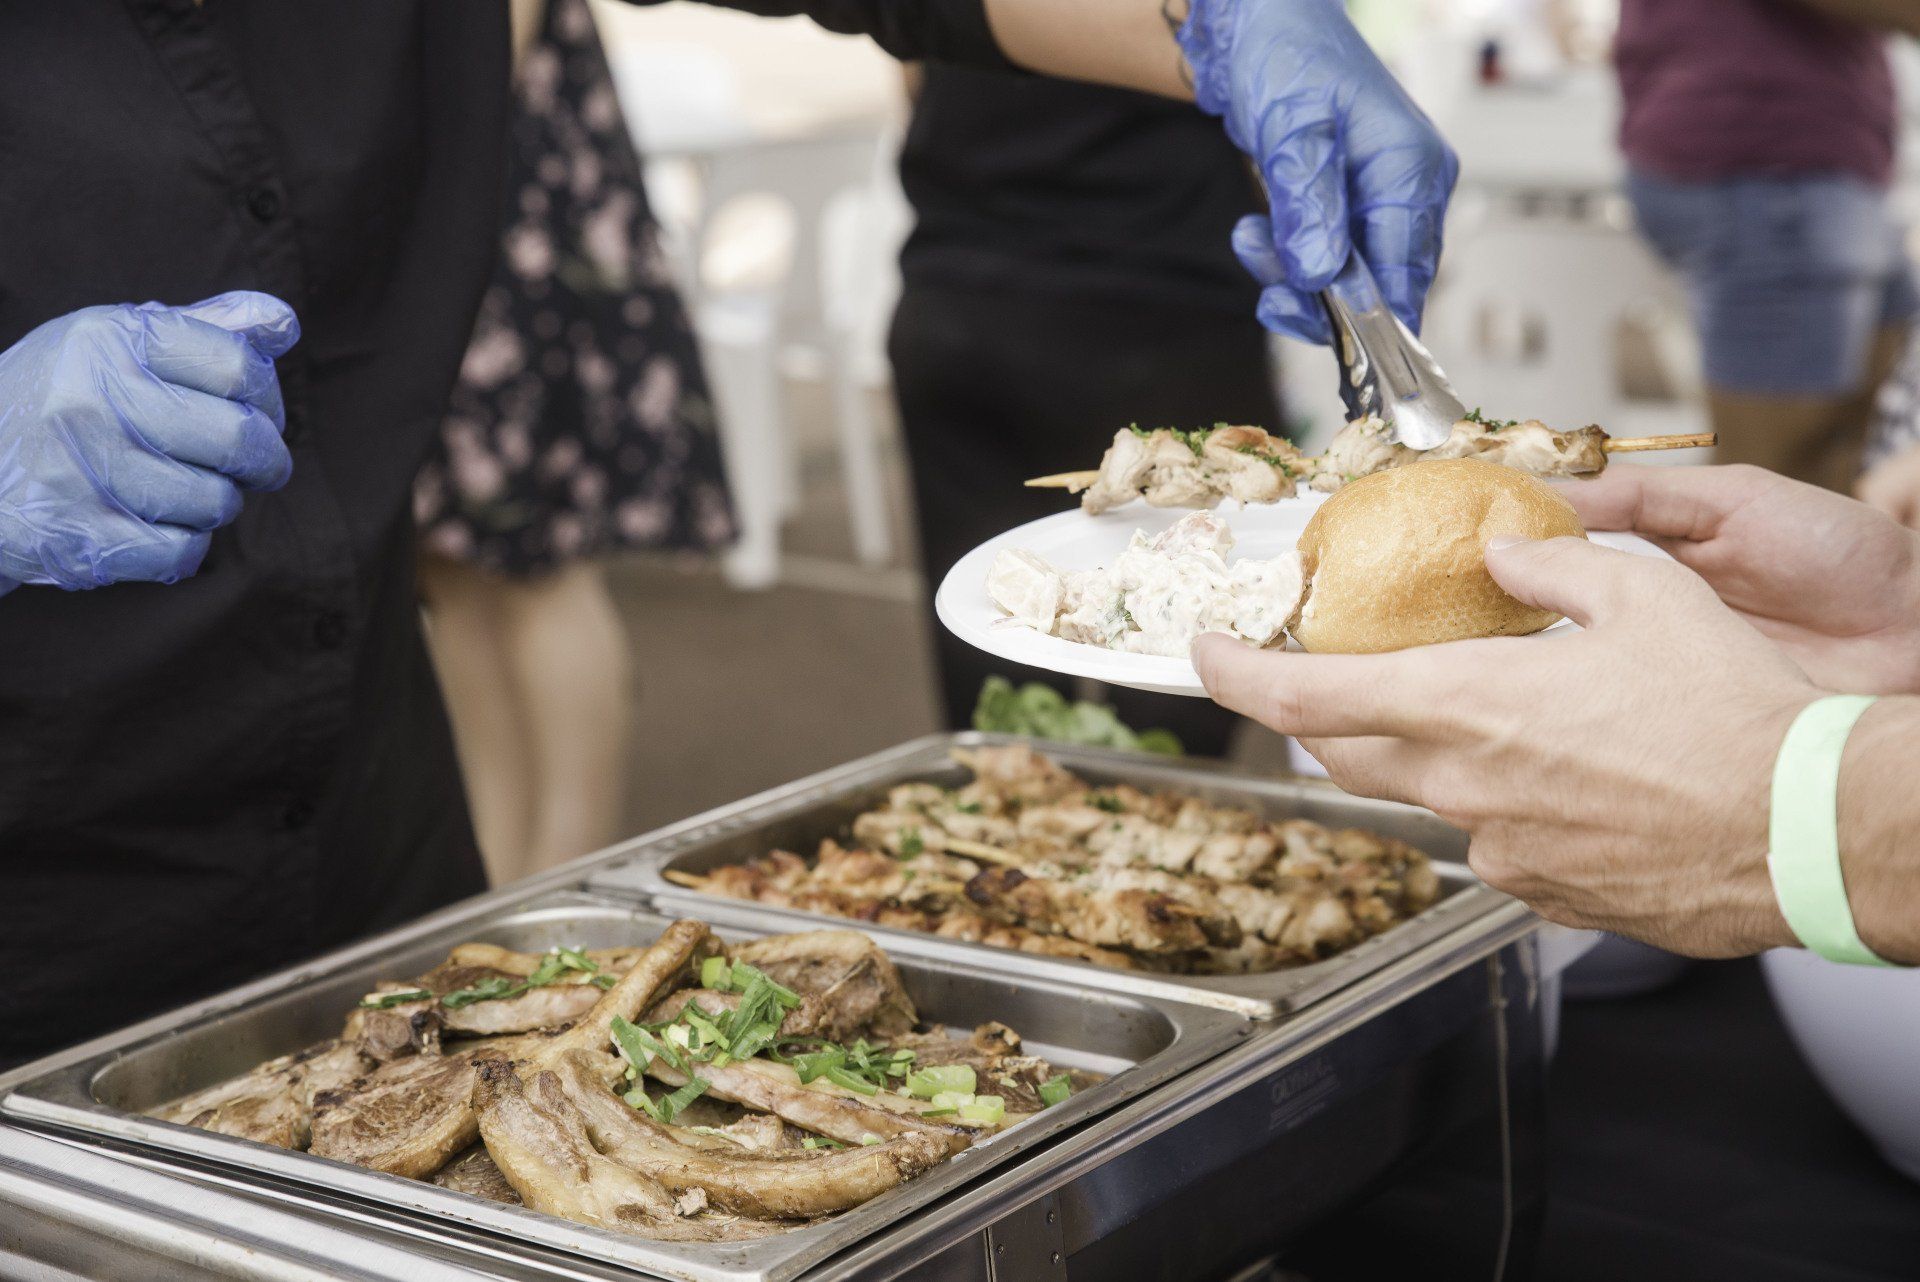 Caterer — Catering Services in Deerugan,QLD